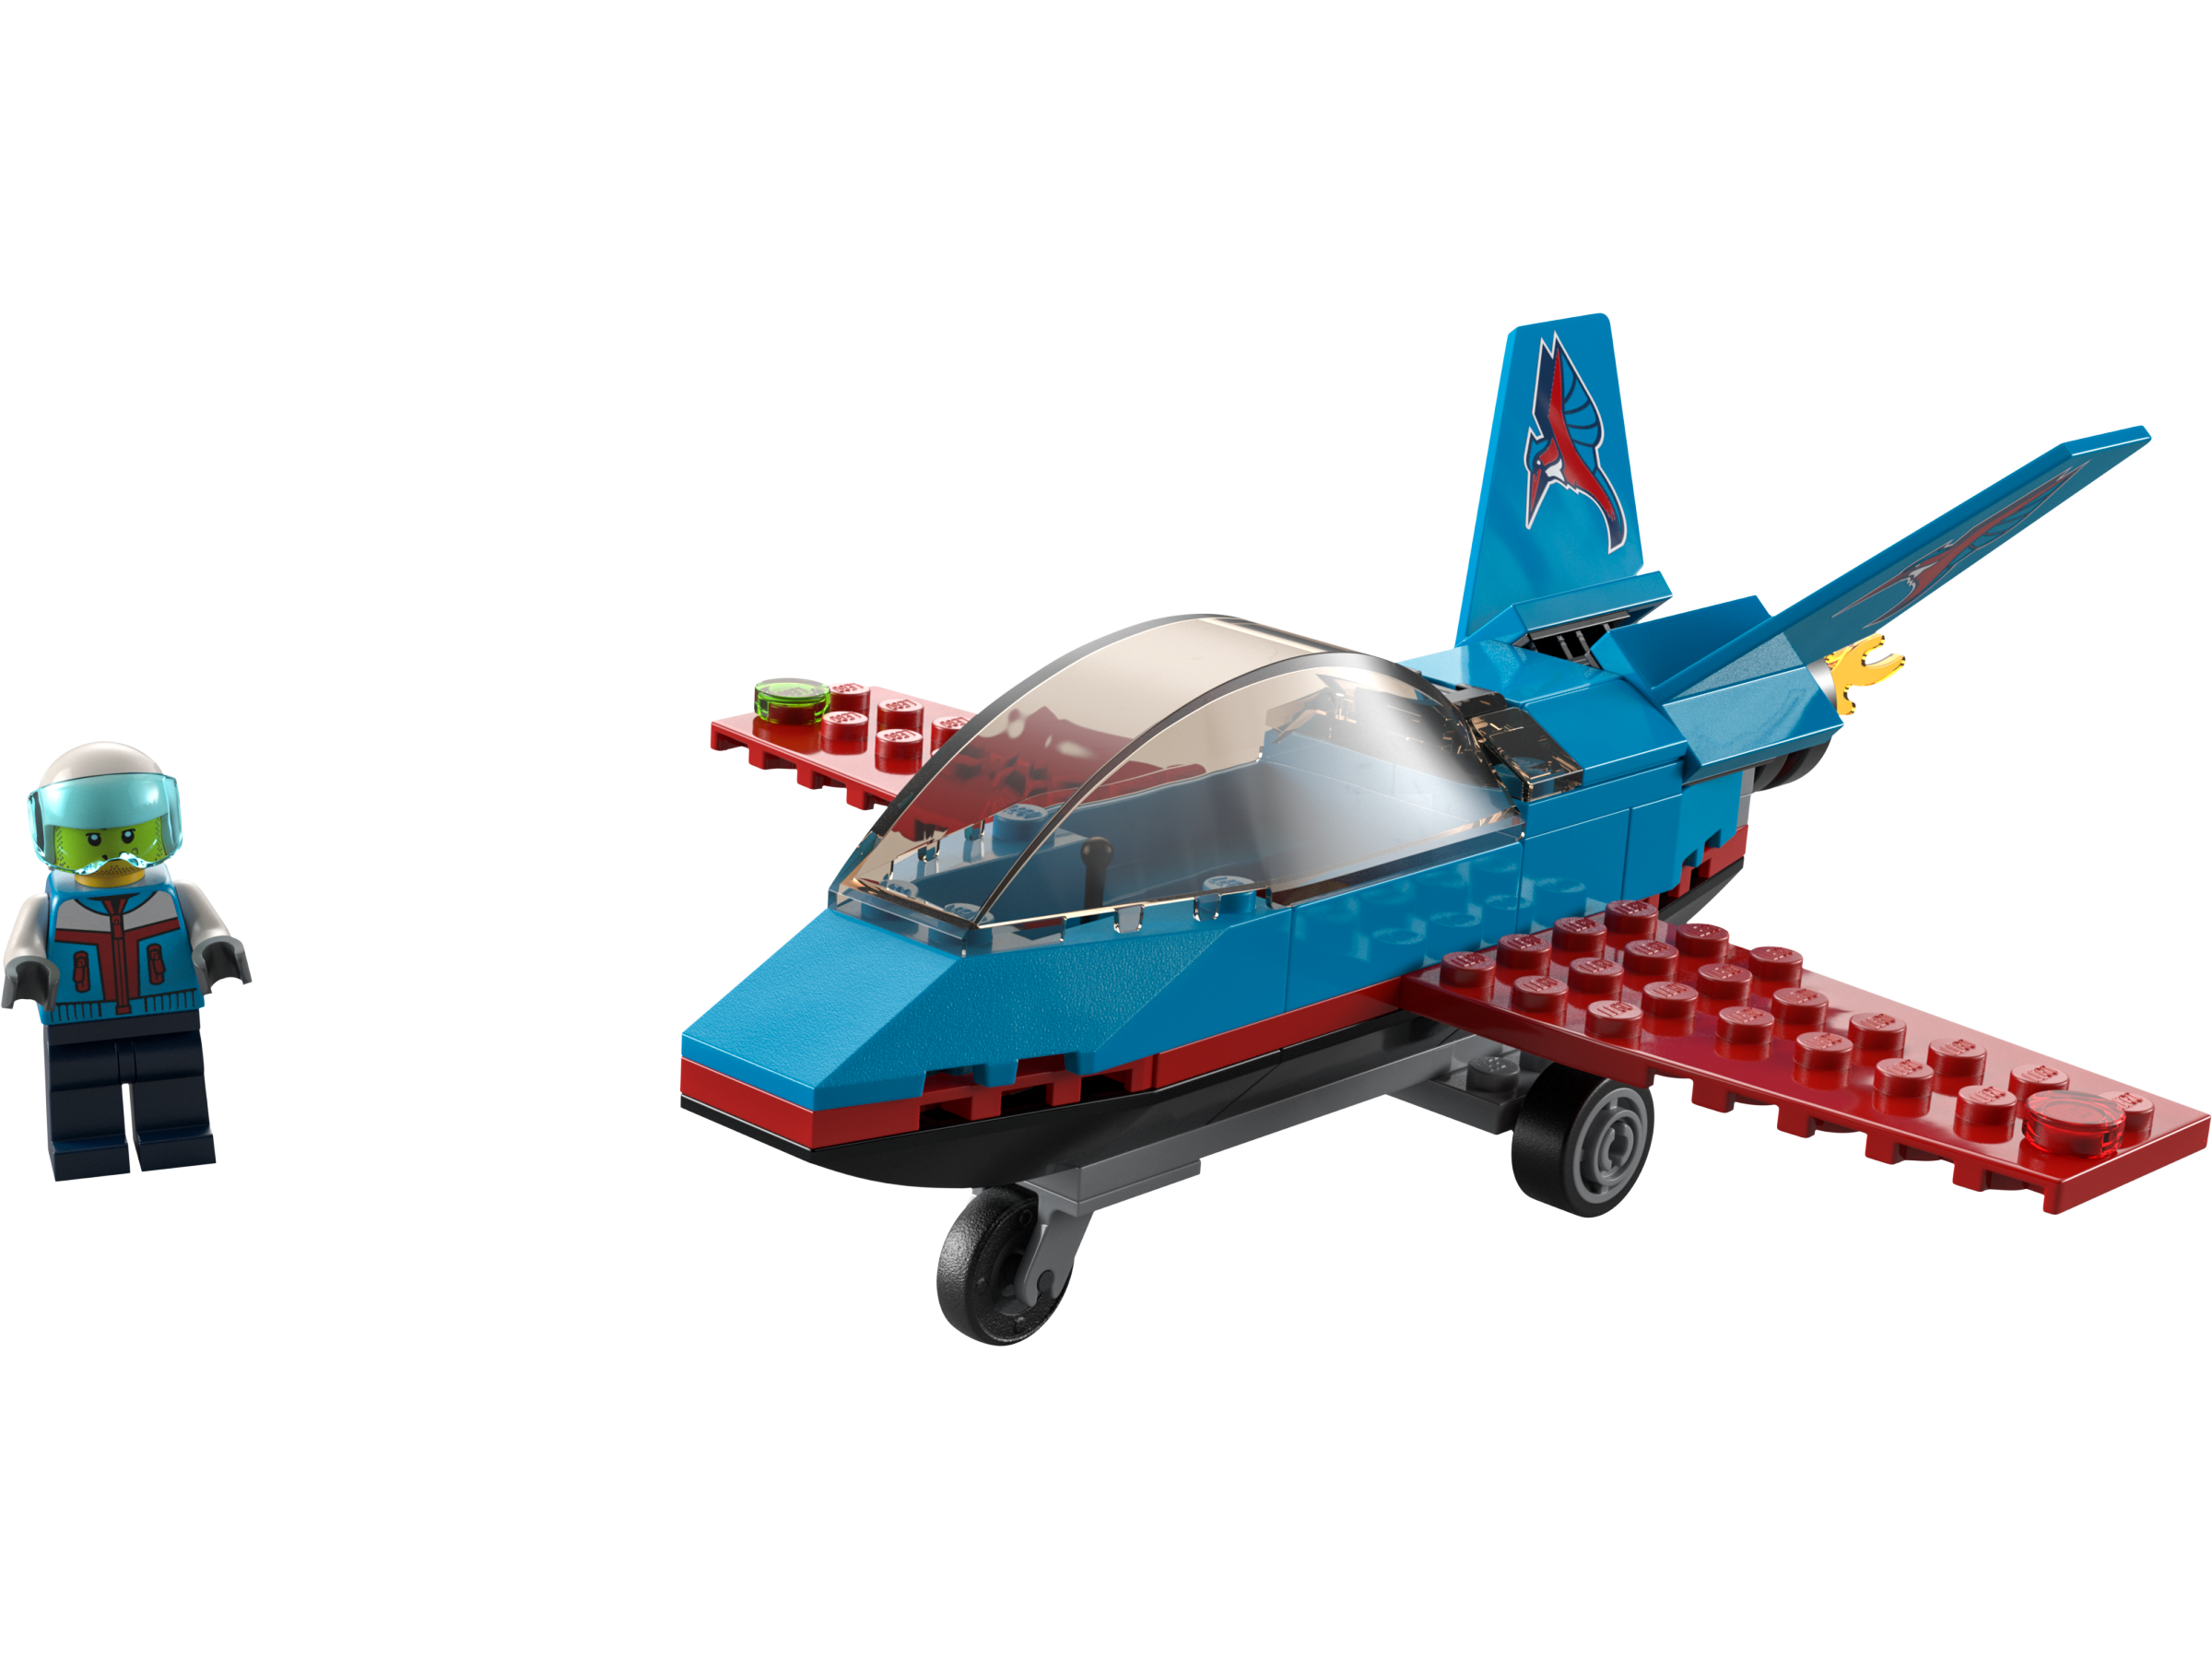 Stunt Official | 60323 | at Shop LEGO® US Plane City the online Buy